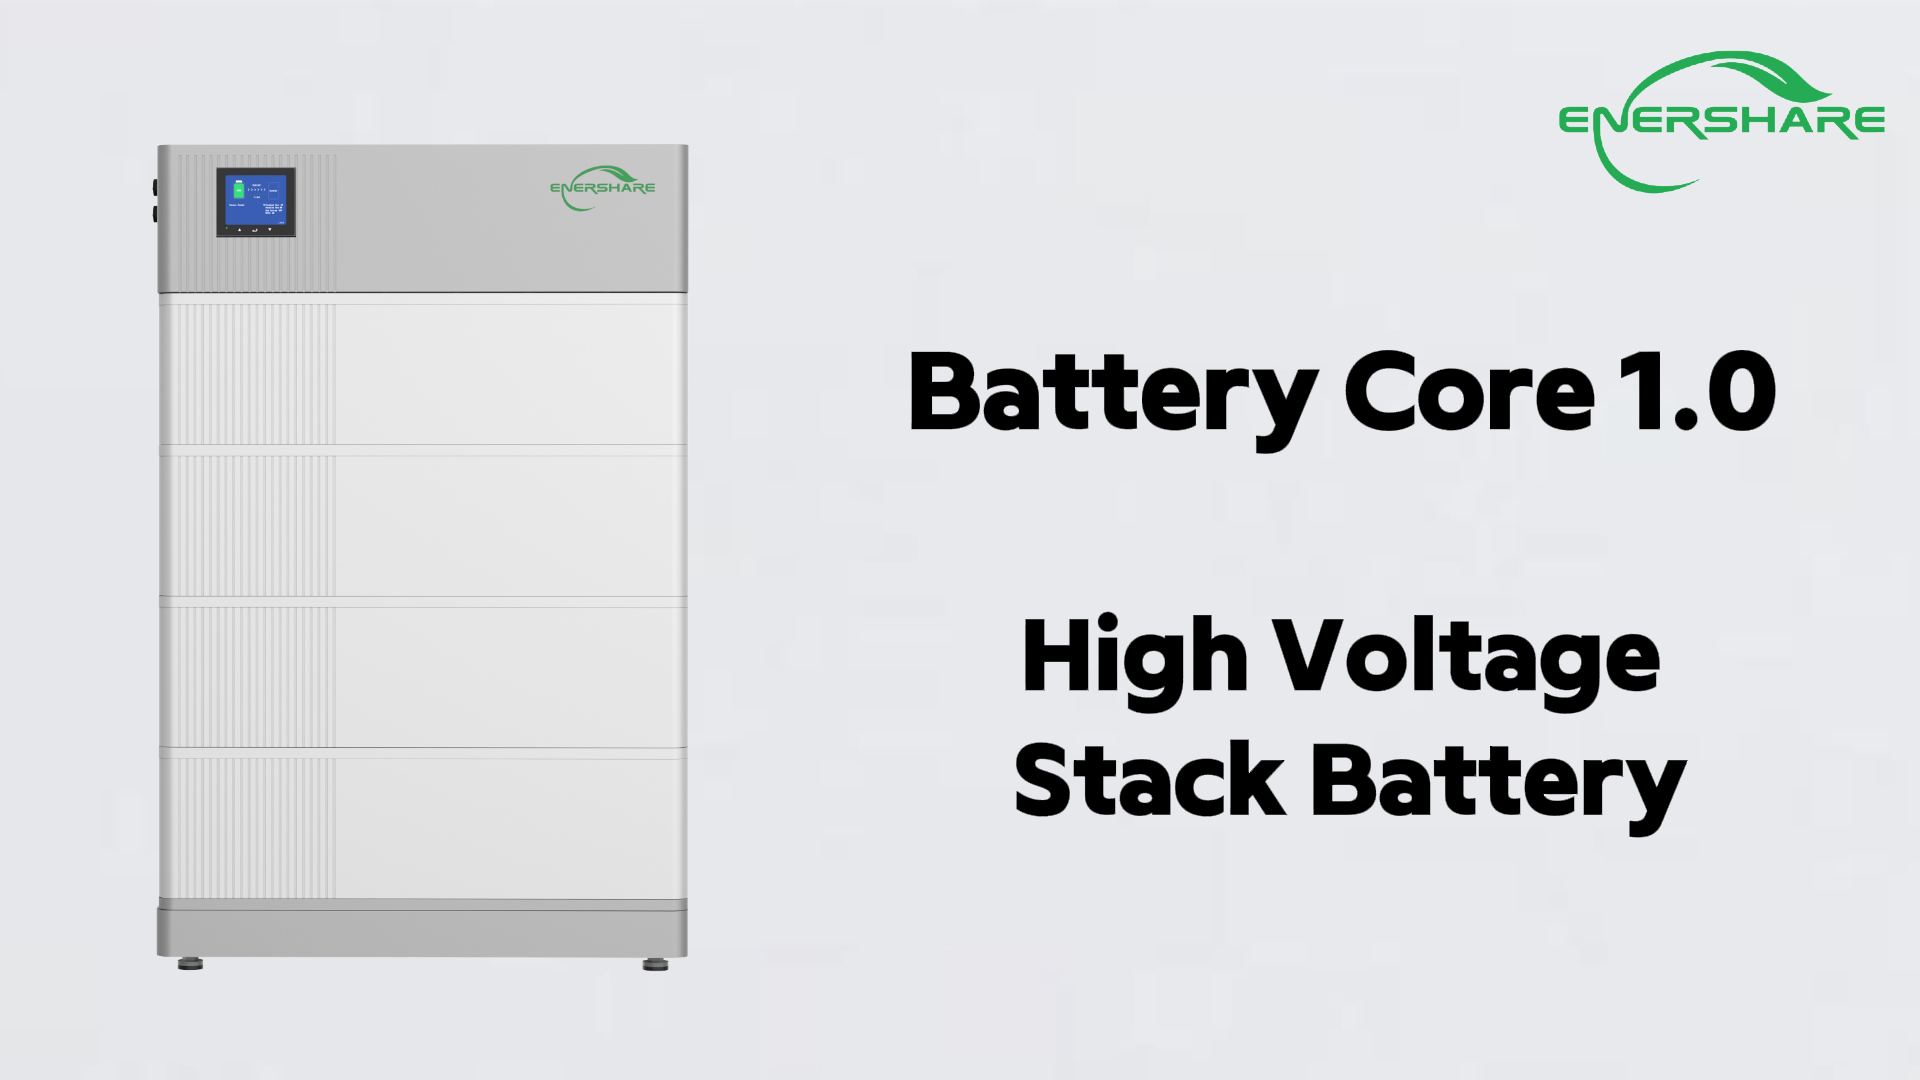 Enershare Battery Core Series--High Voltage Stack Battery